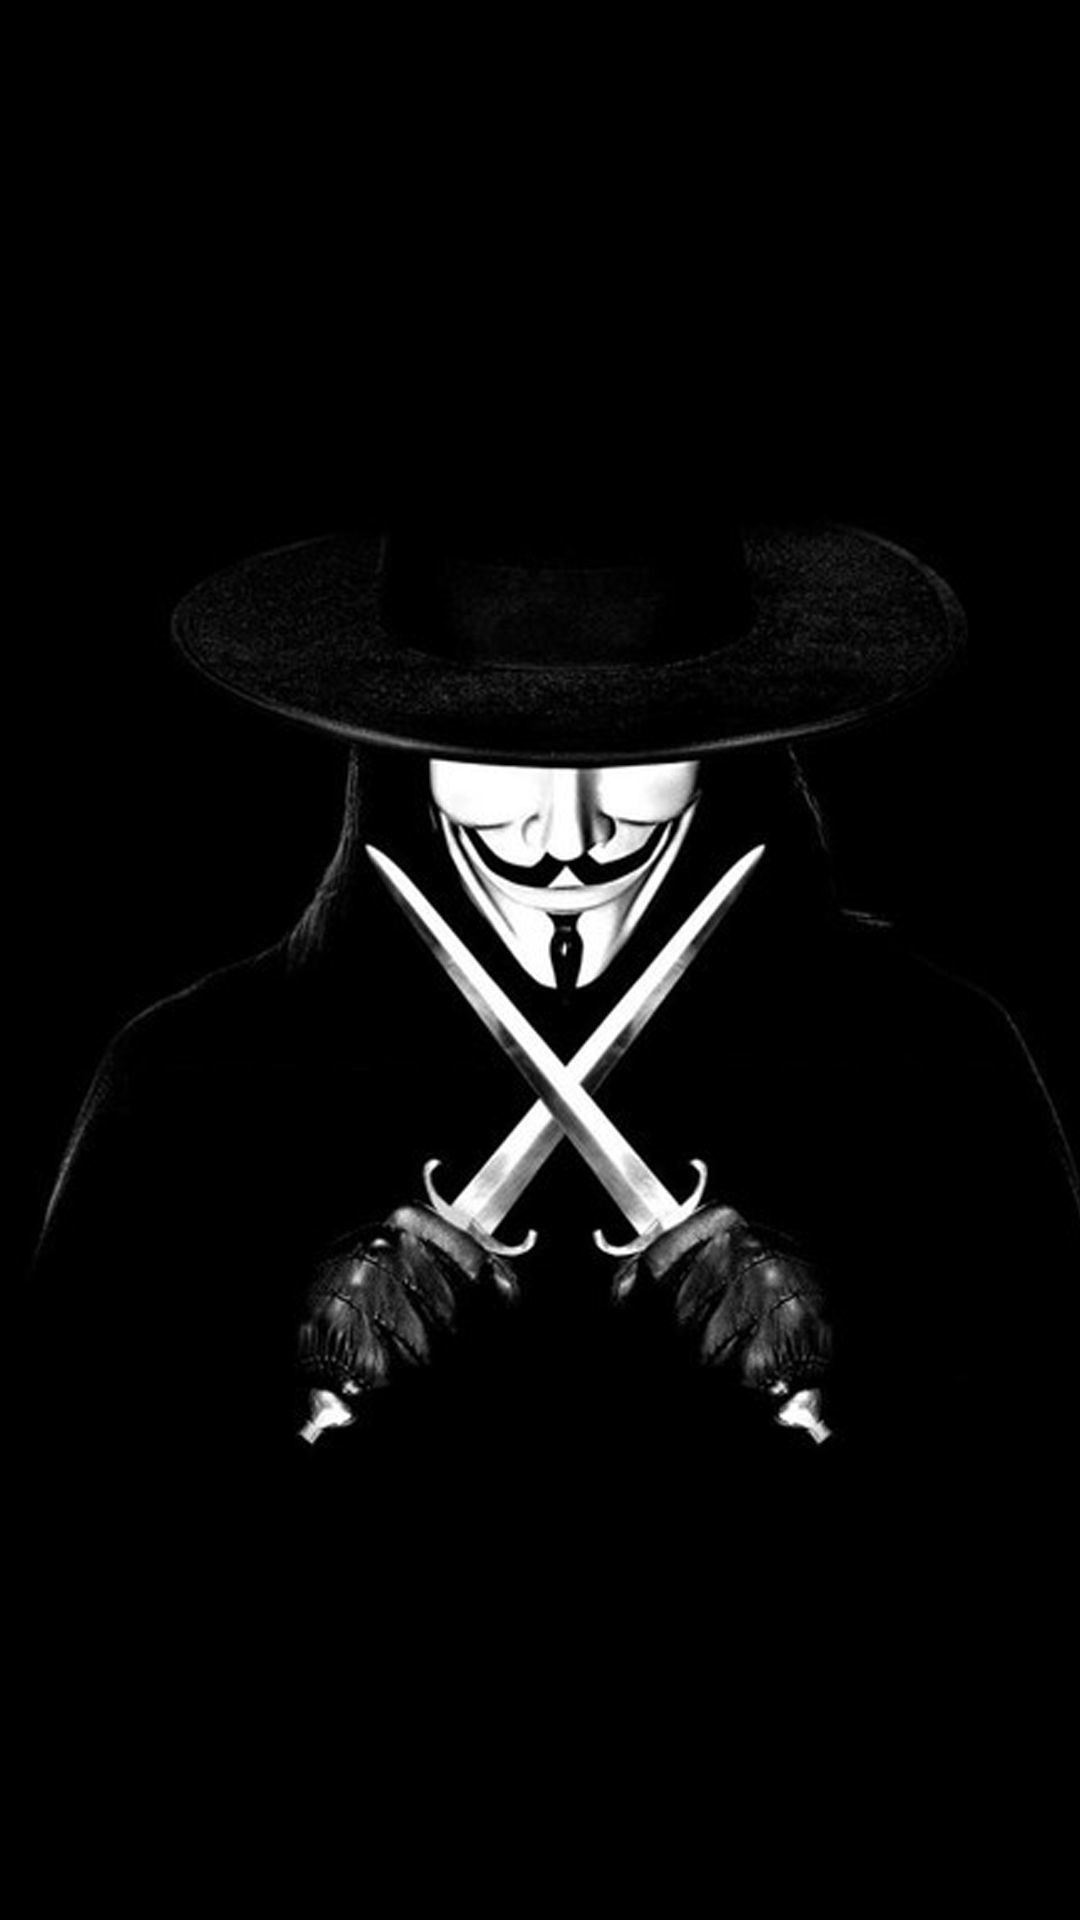 1080x1920 V for Vendetta #anonymous #4chan #hackers